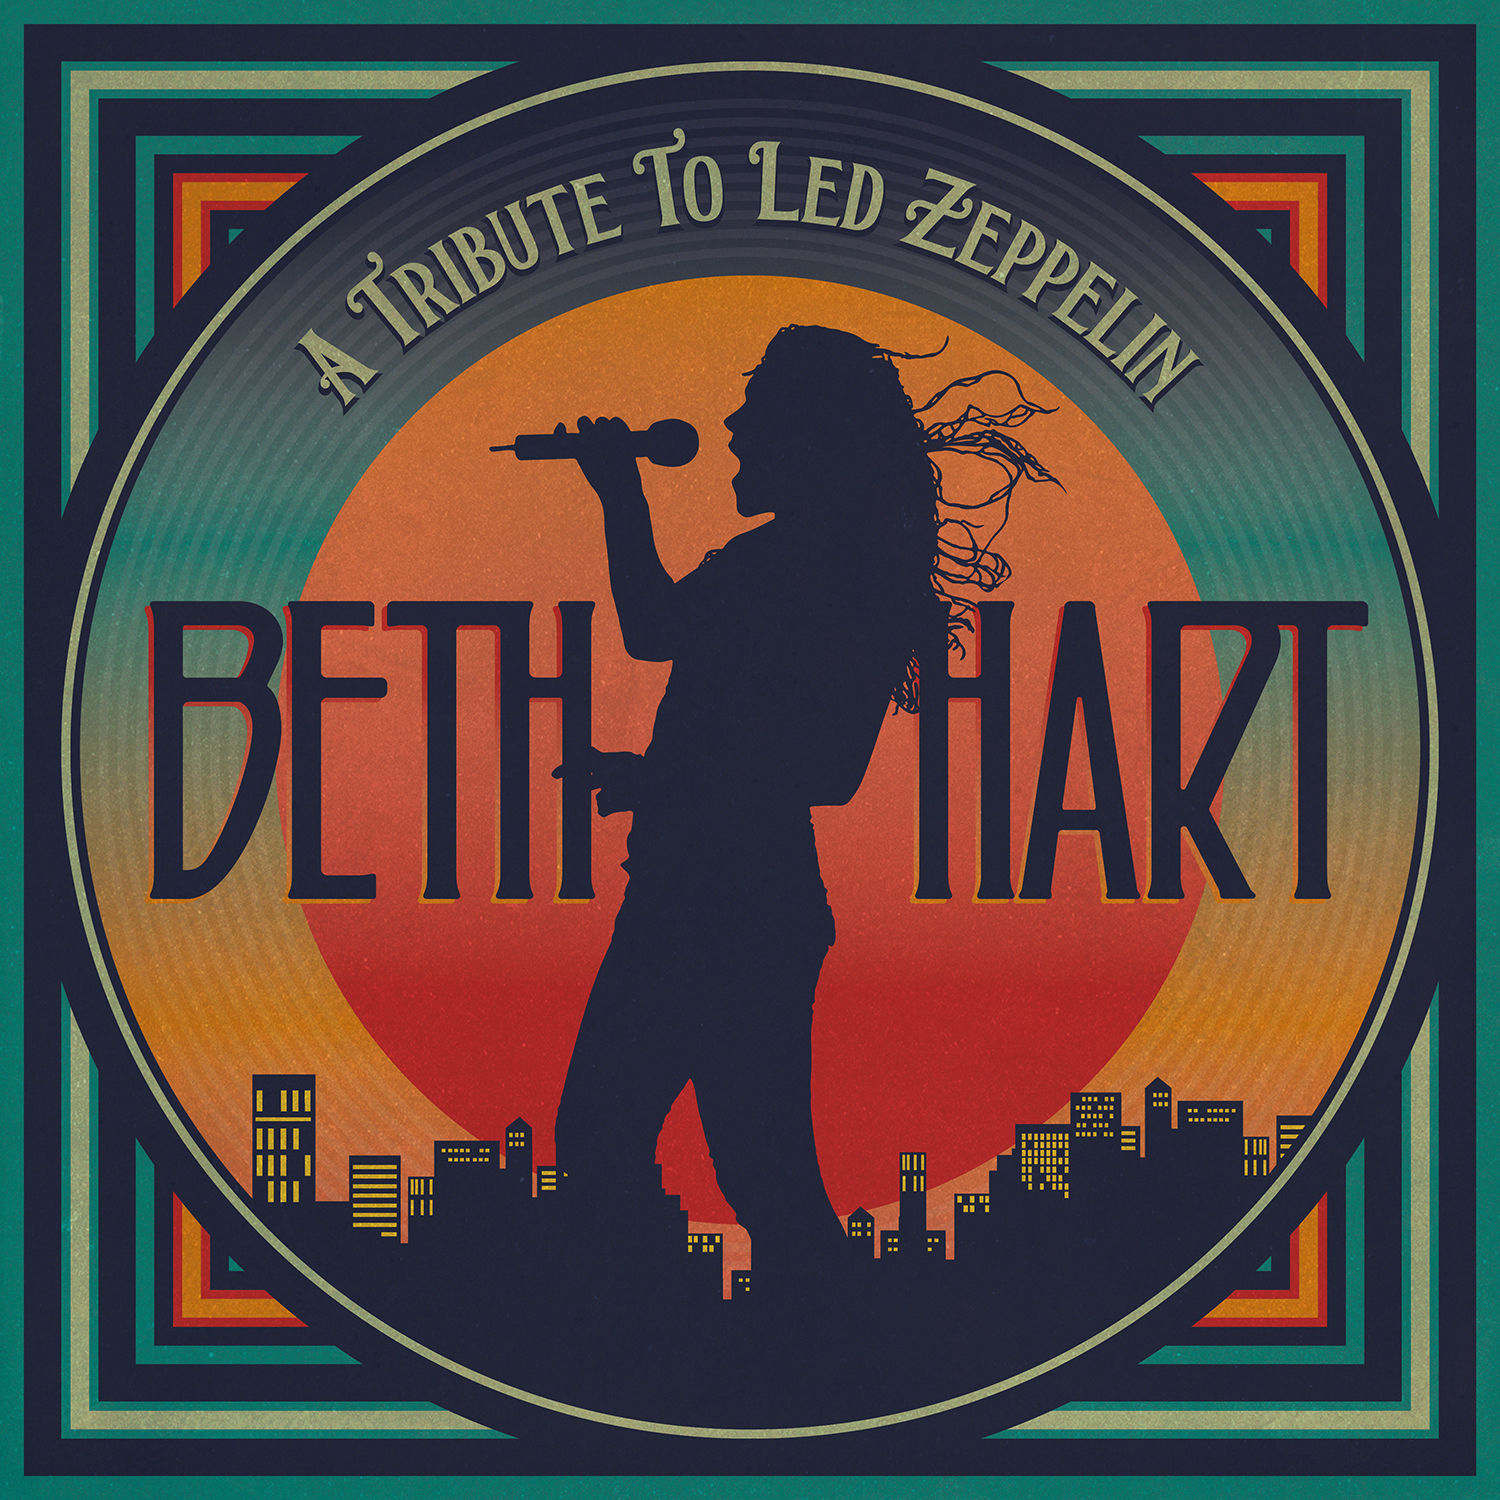 Beth Hart - 2022 - A Tribute To Led Zeppelin (24-44.1)